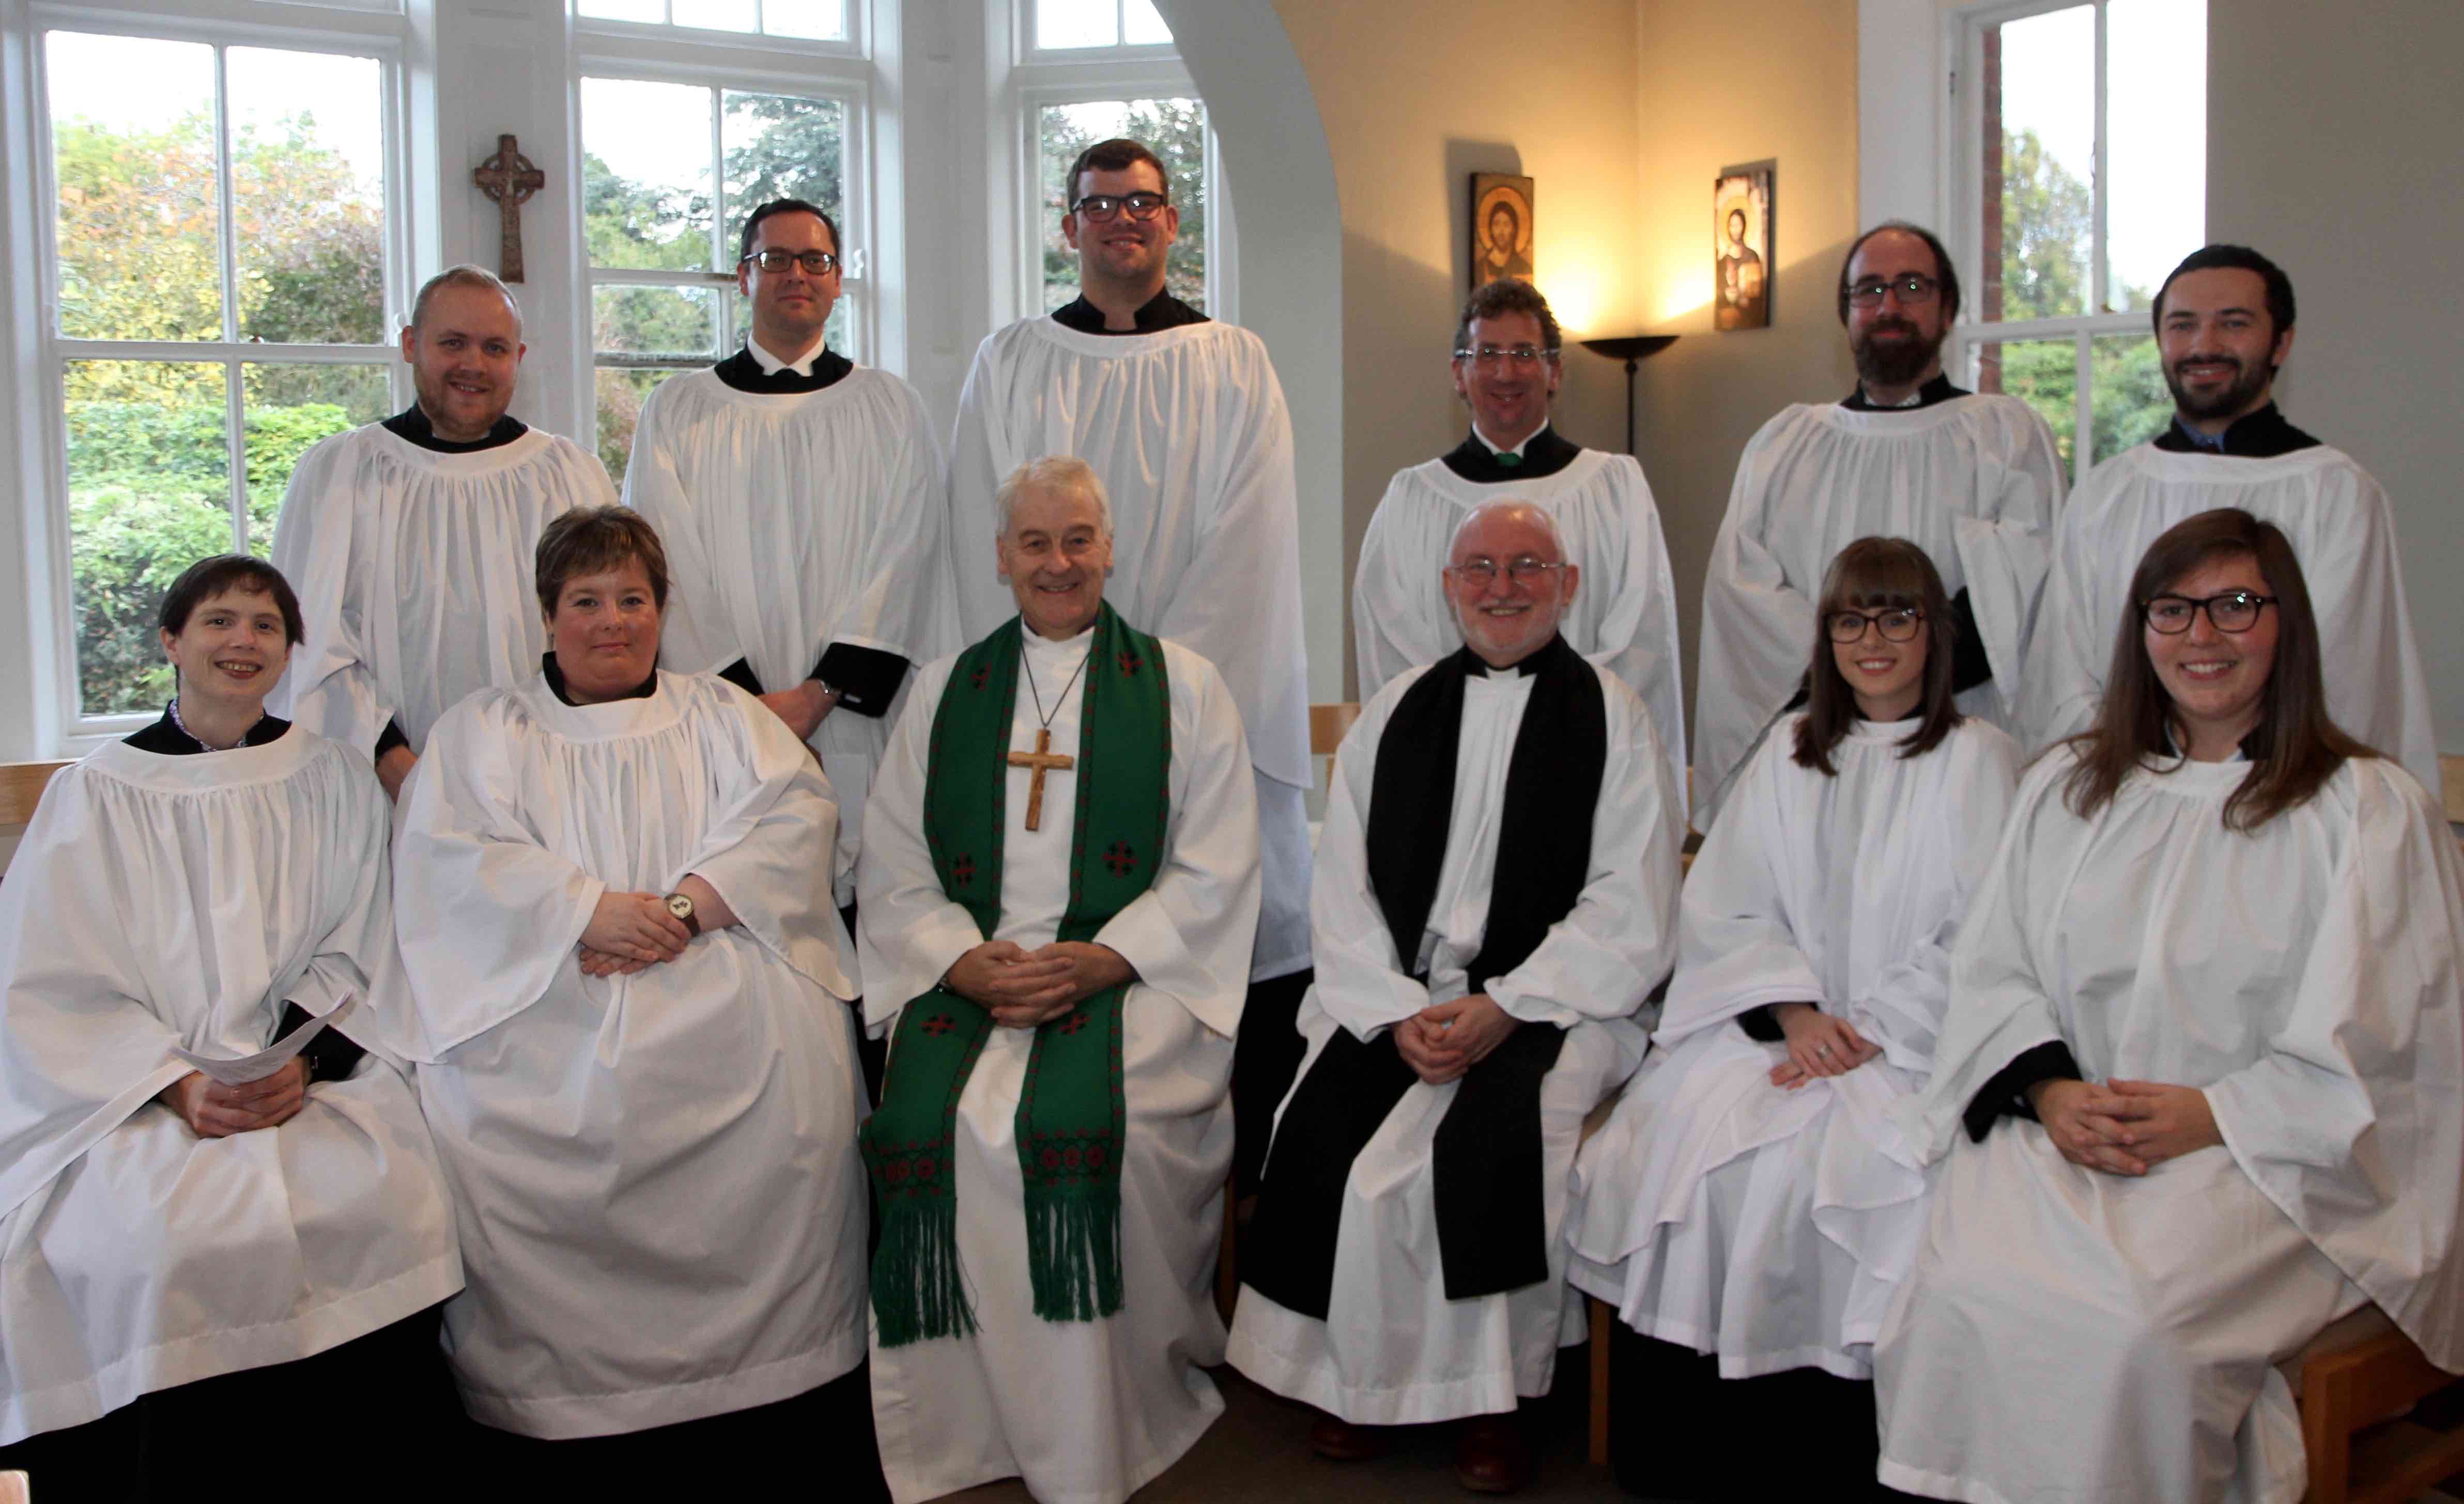 CITI ordinands Edwin Aiken, Rodney Blair, Andrea Cotter, Sarah Crawford, Alistair Doyle, Nathan Ervine, Claire Henderson, Leonard Madden, Matthew Topley and Anna Williams are pictured with Archbishop Michael Jackson and the Revd Dr Patrick McGlinchey.